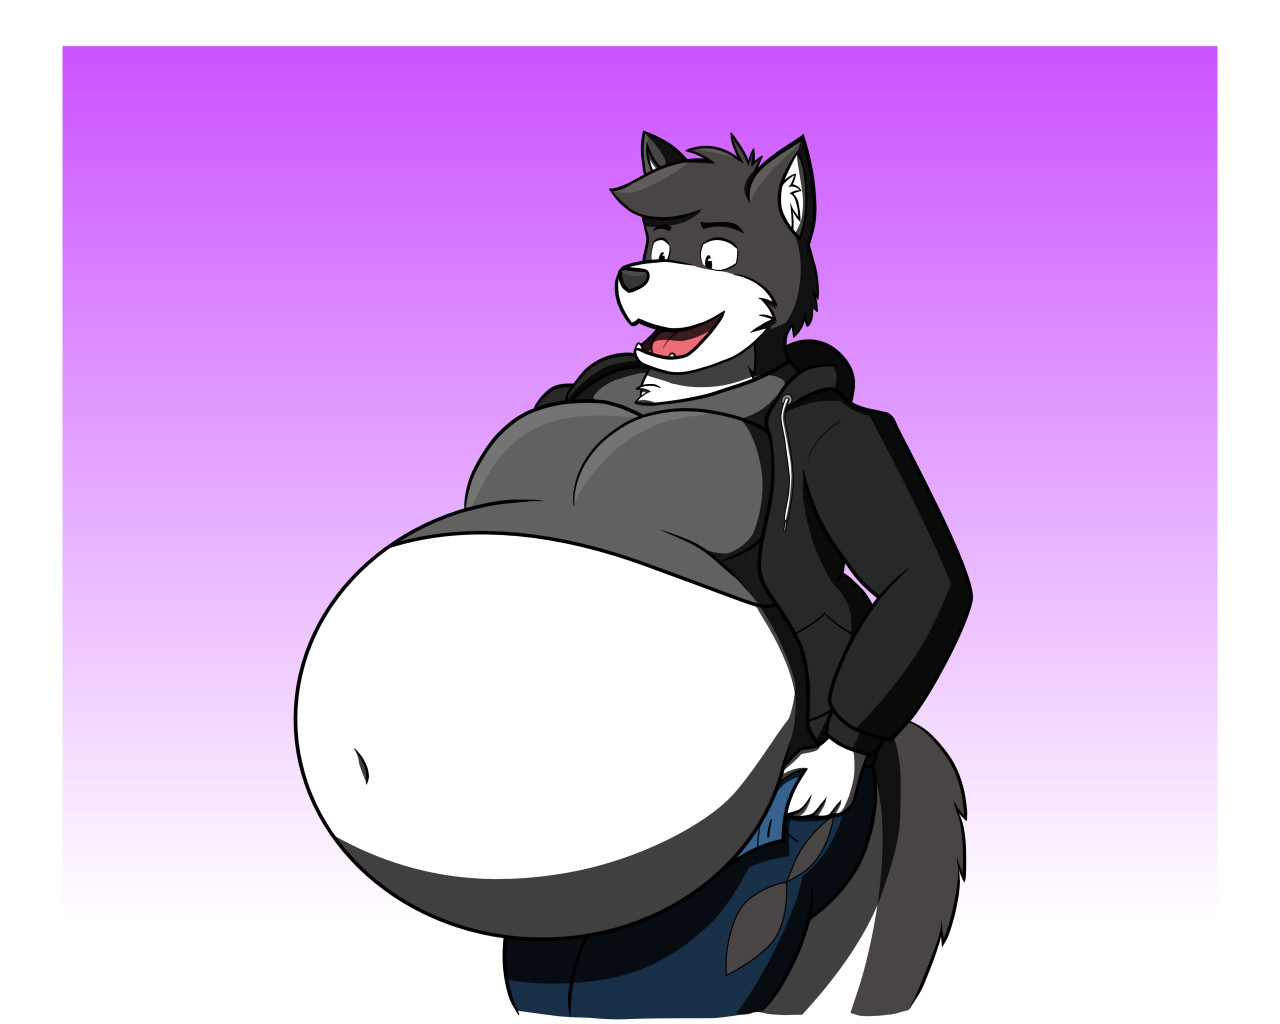 Furry belly inflation